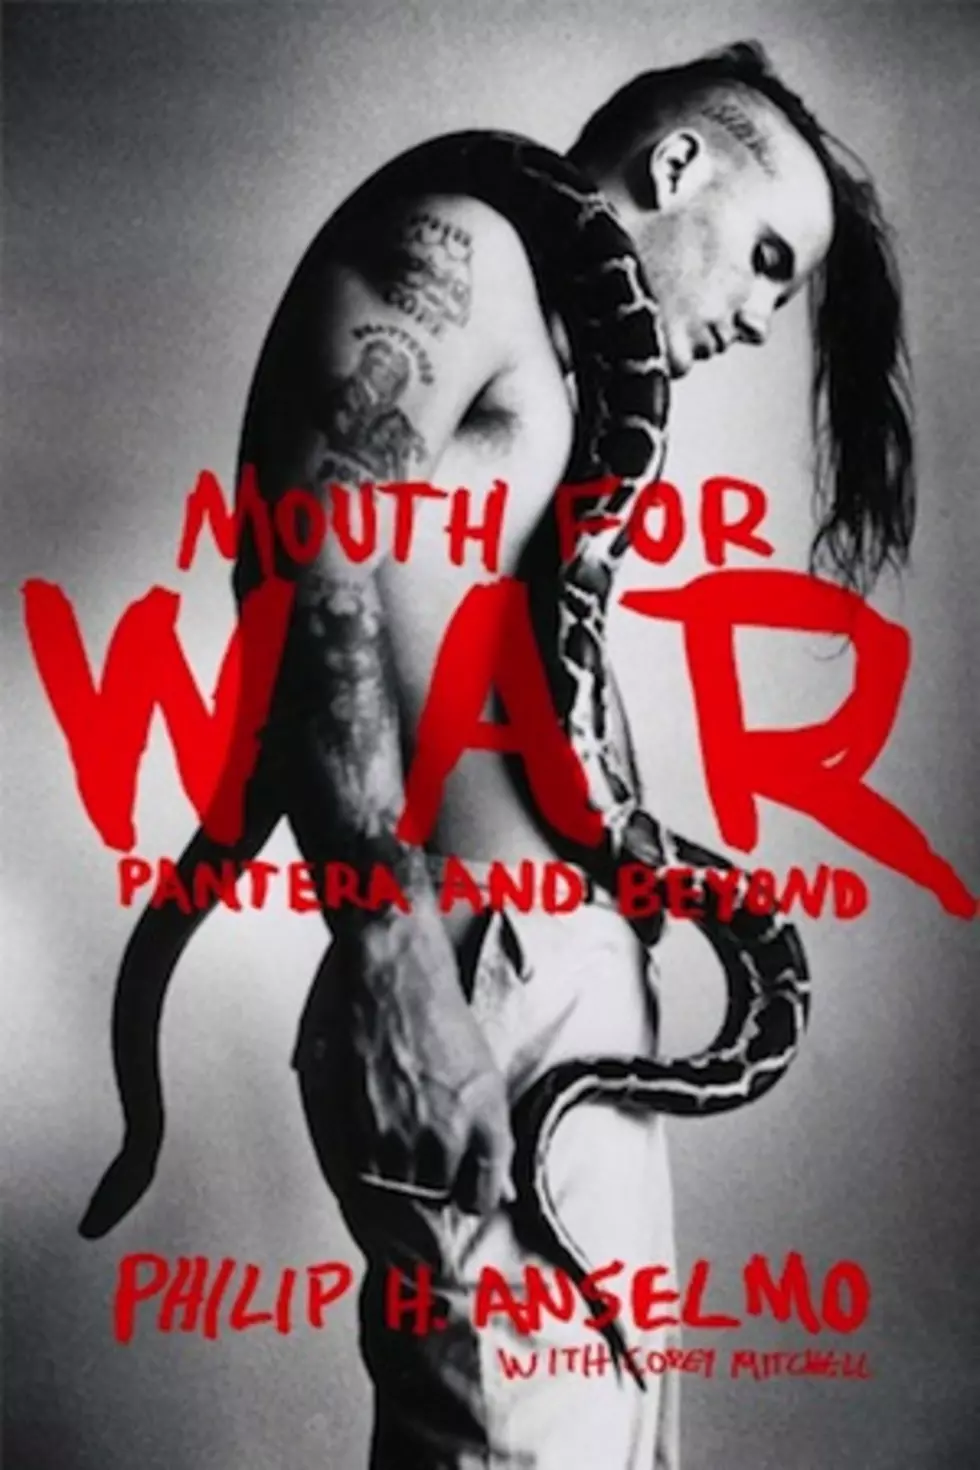 Philip Anselmo to Release Official Autobiography &#8216;Mouth for War&#8217; in Early 2015